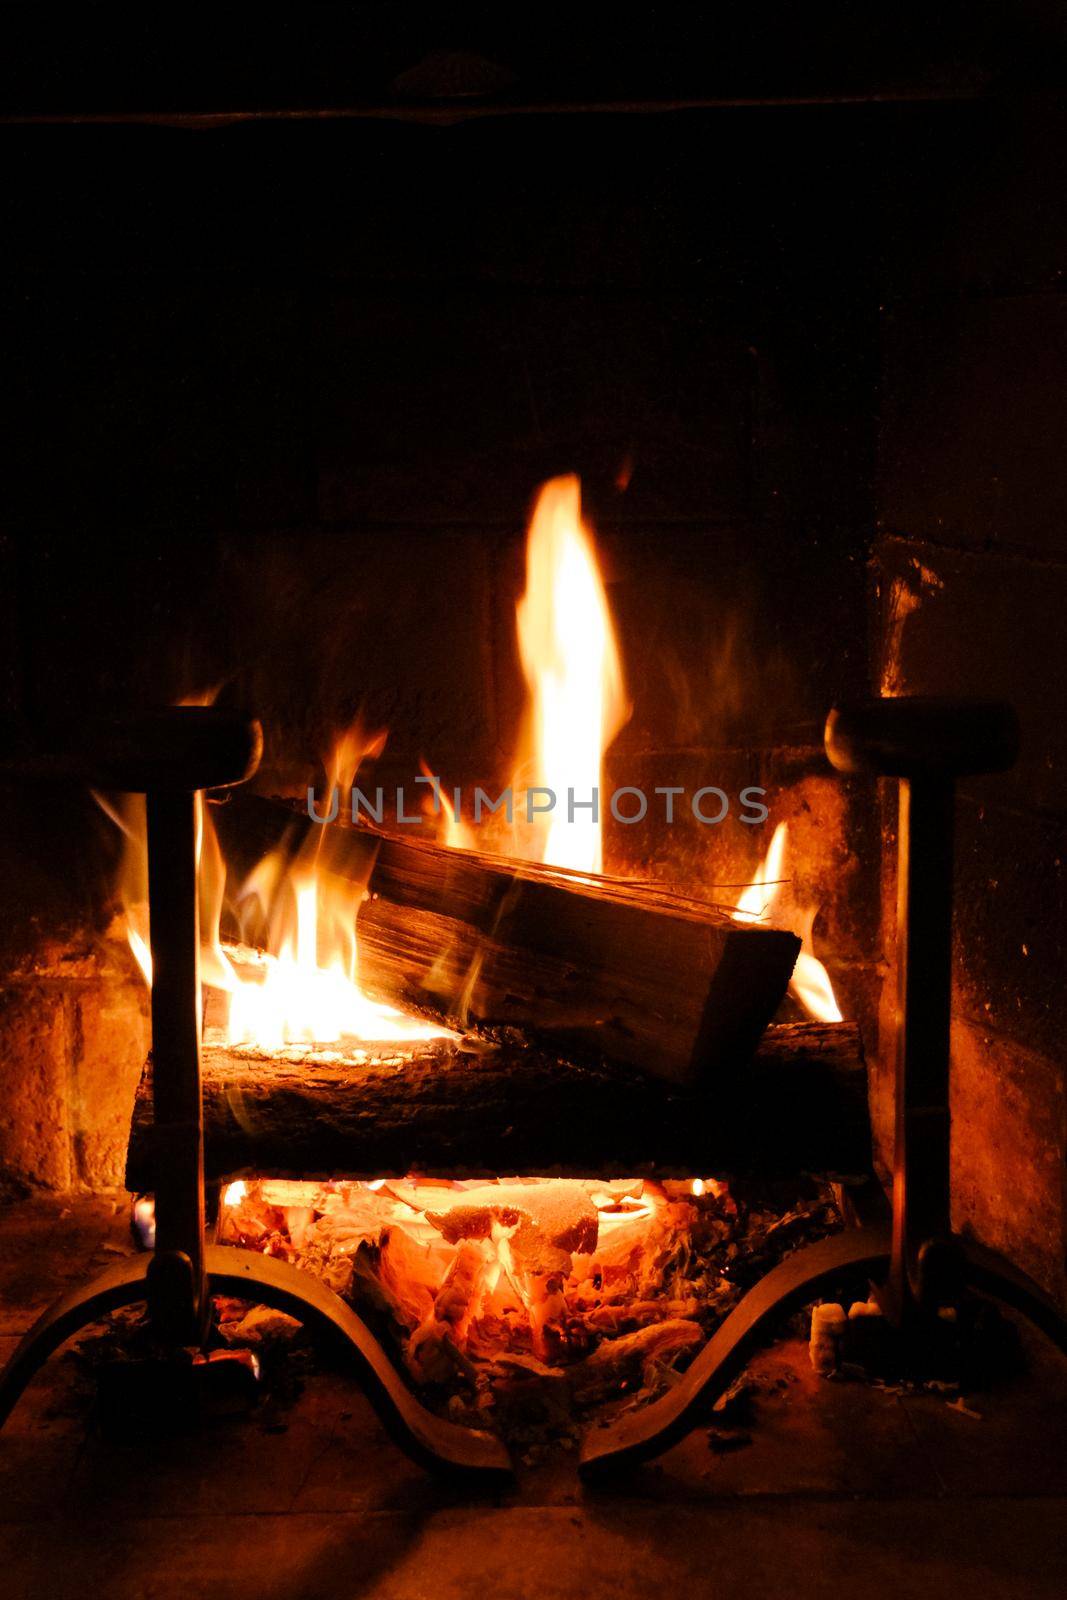 Fireplace close-up interior view at night. Abstract background